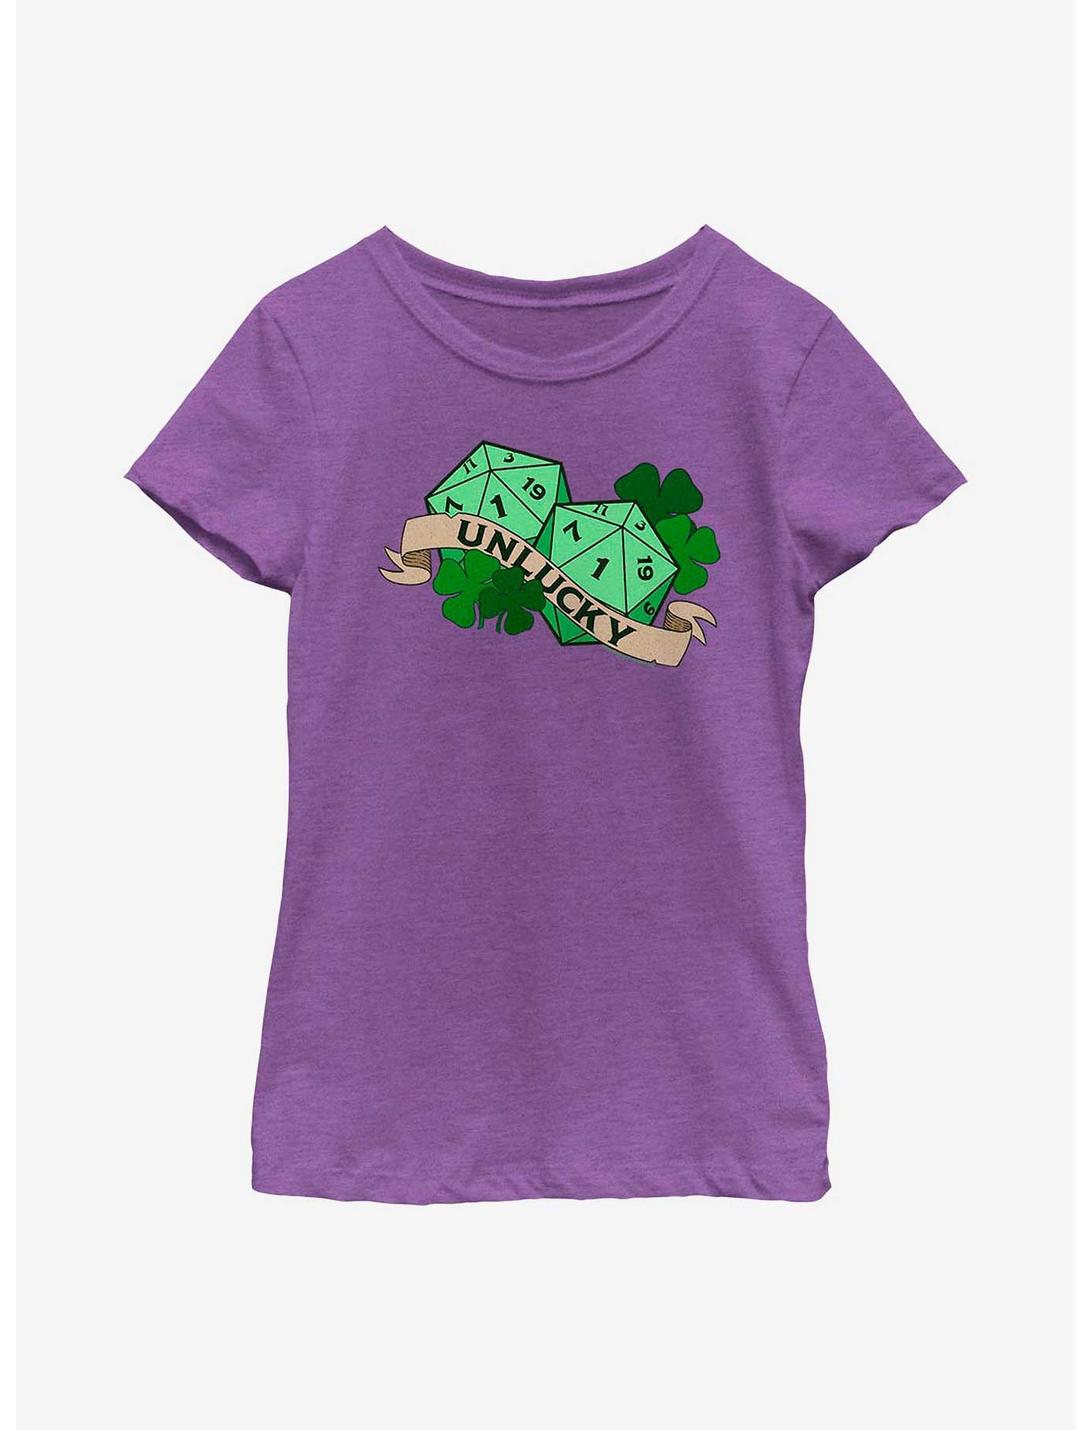 Dungeons & Dragons Unlucky Double Dice Youth Girls T-Shirt, PURPLE BERRY, hi-res